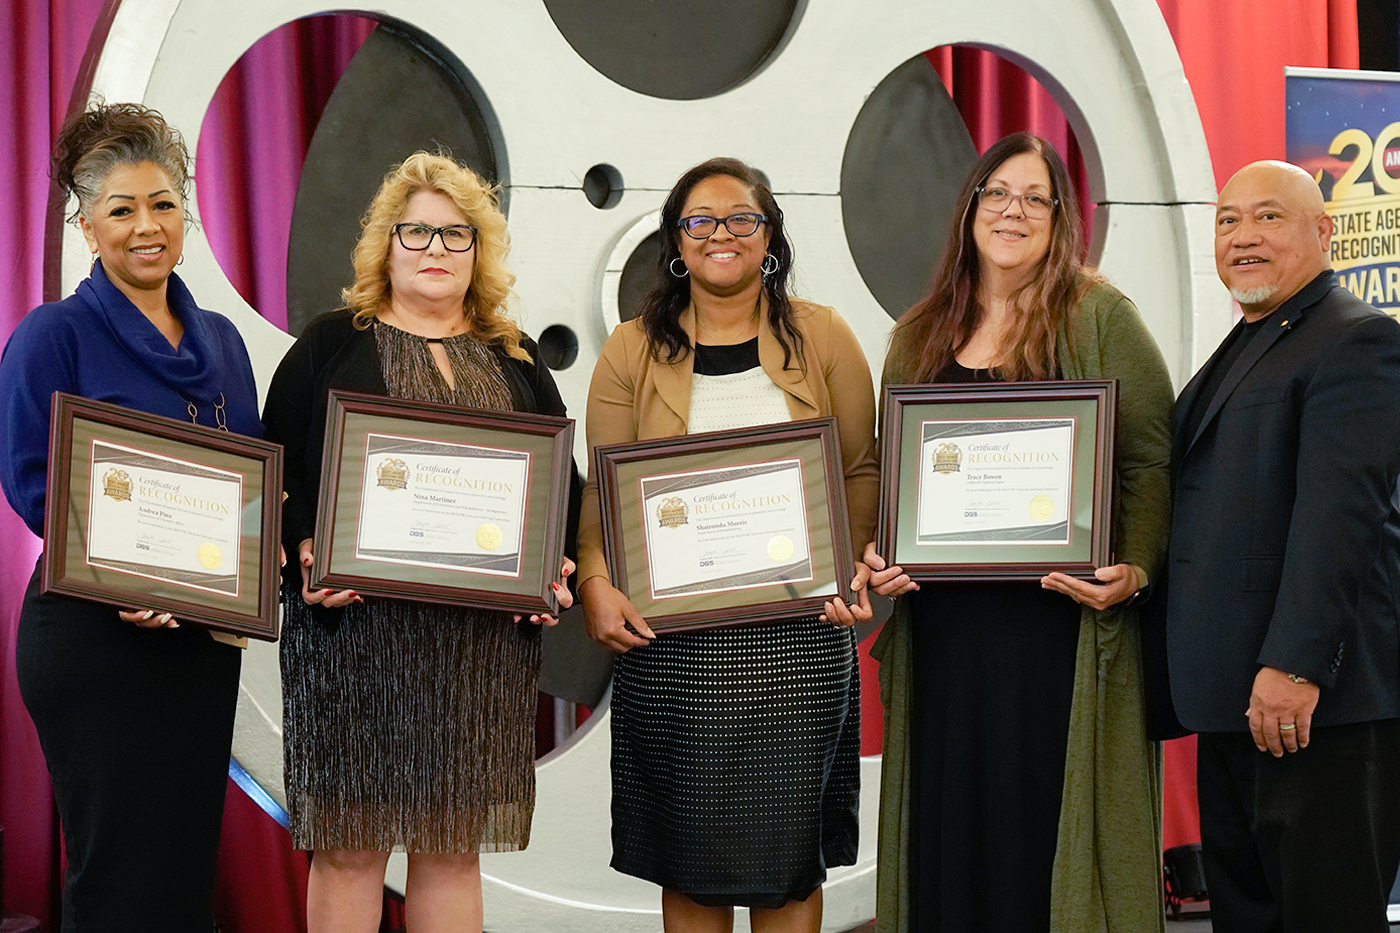 Michael Aguillio, Department of General Services, recognized Andrea Pina, Department of Consumer Affairs, Nina Martinez, Department of Corrections and Rehabilitation – Headquarters, Shaironda Morris, Department of Rehabilitation, and Tracy Bowen, California Highway Patrol, for their leadership on the advocate steering committee.